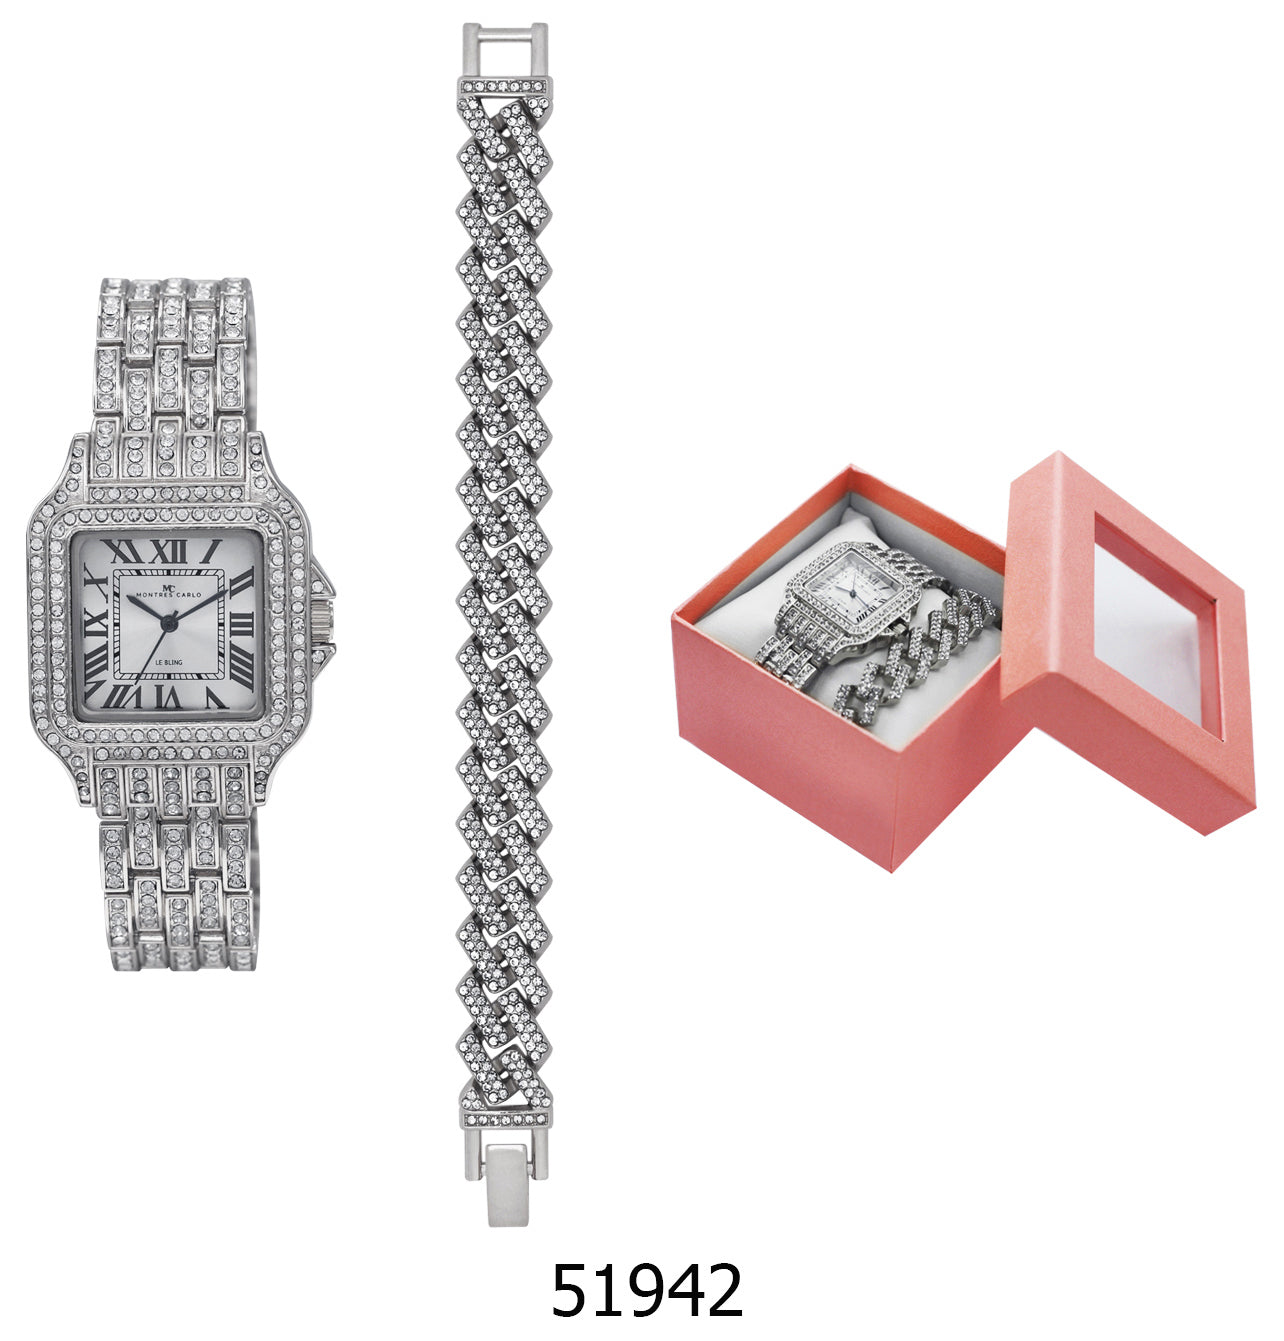 5194 - Boxed Ice Metal Band Watch with Chain